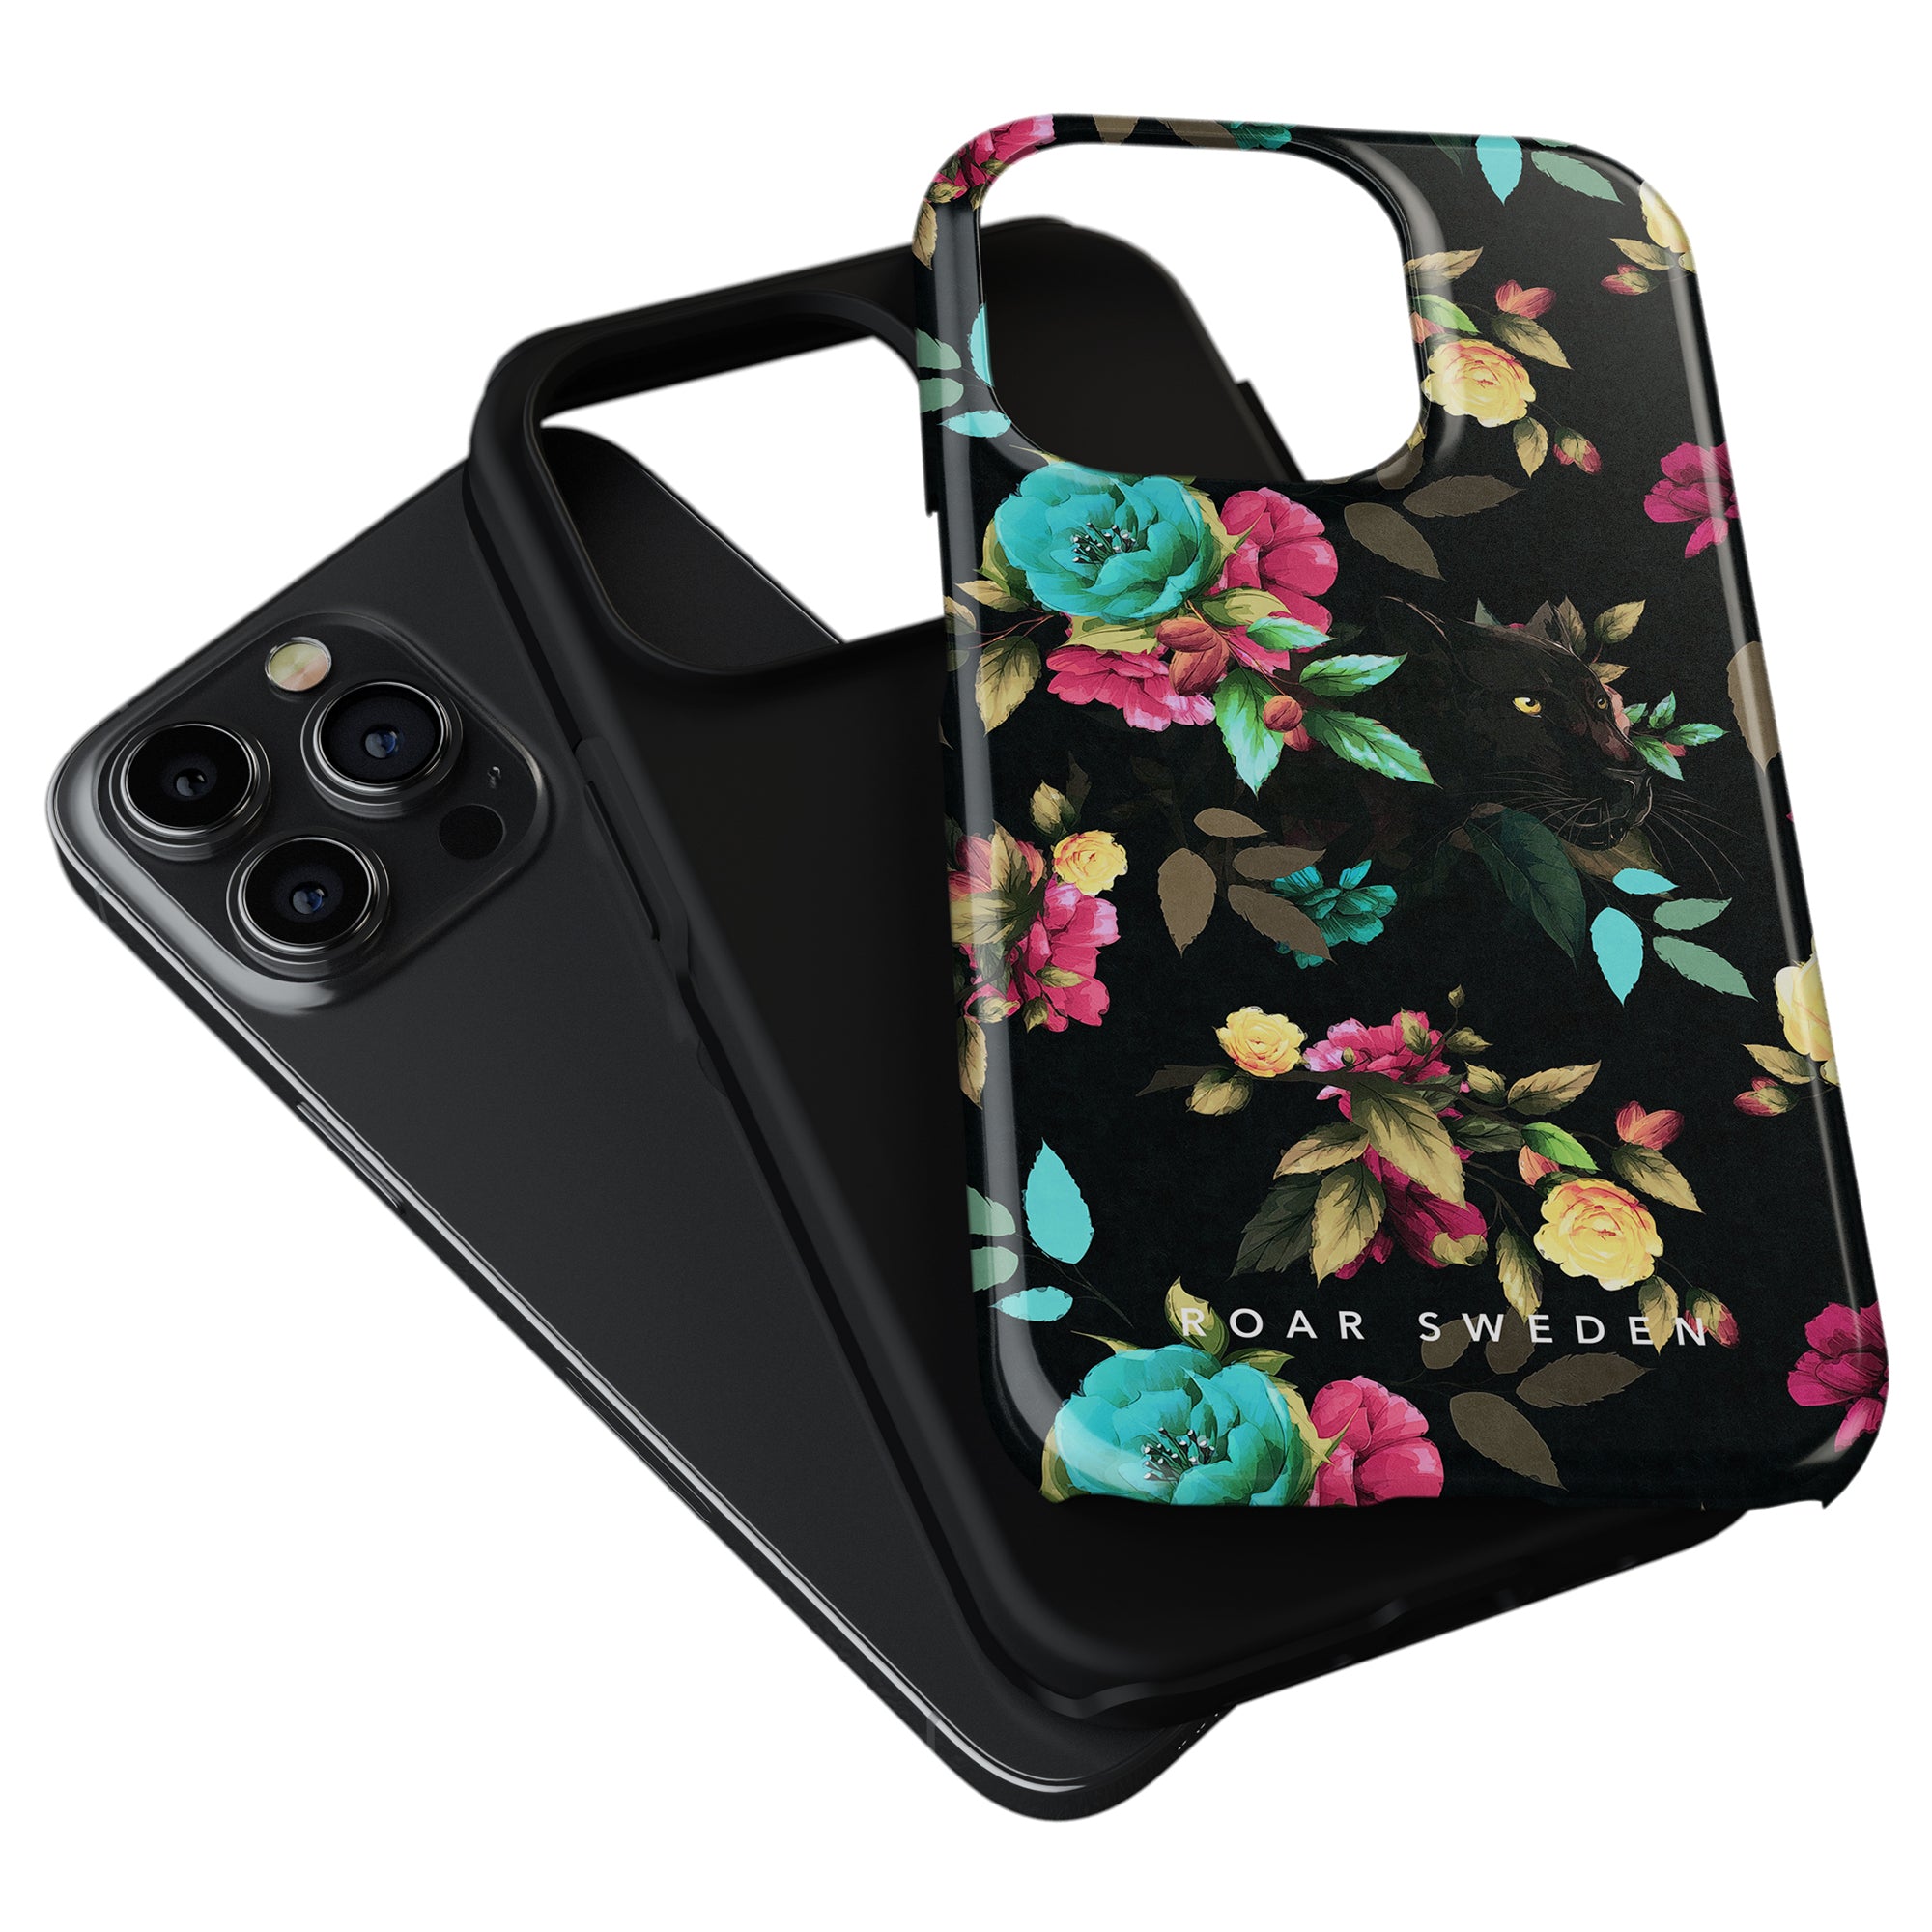 Two Bloom Panther - Tough Cases isolated on a white background, one with a floral pattern and the other solid black, both designed as skyddande skal for a smartphone model with three camera lenses.